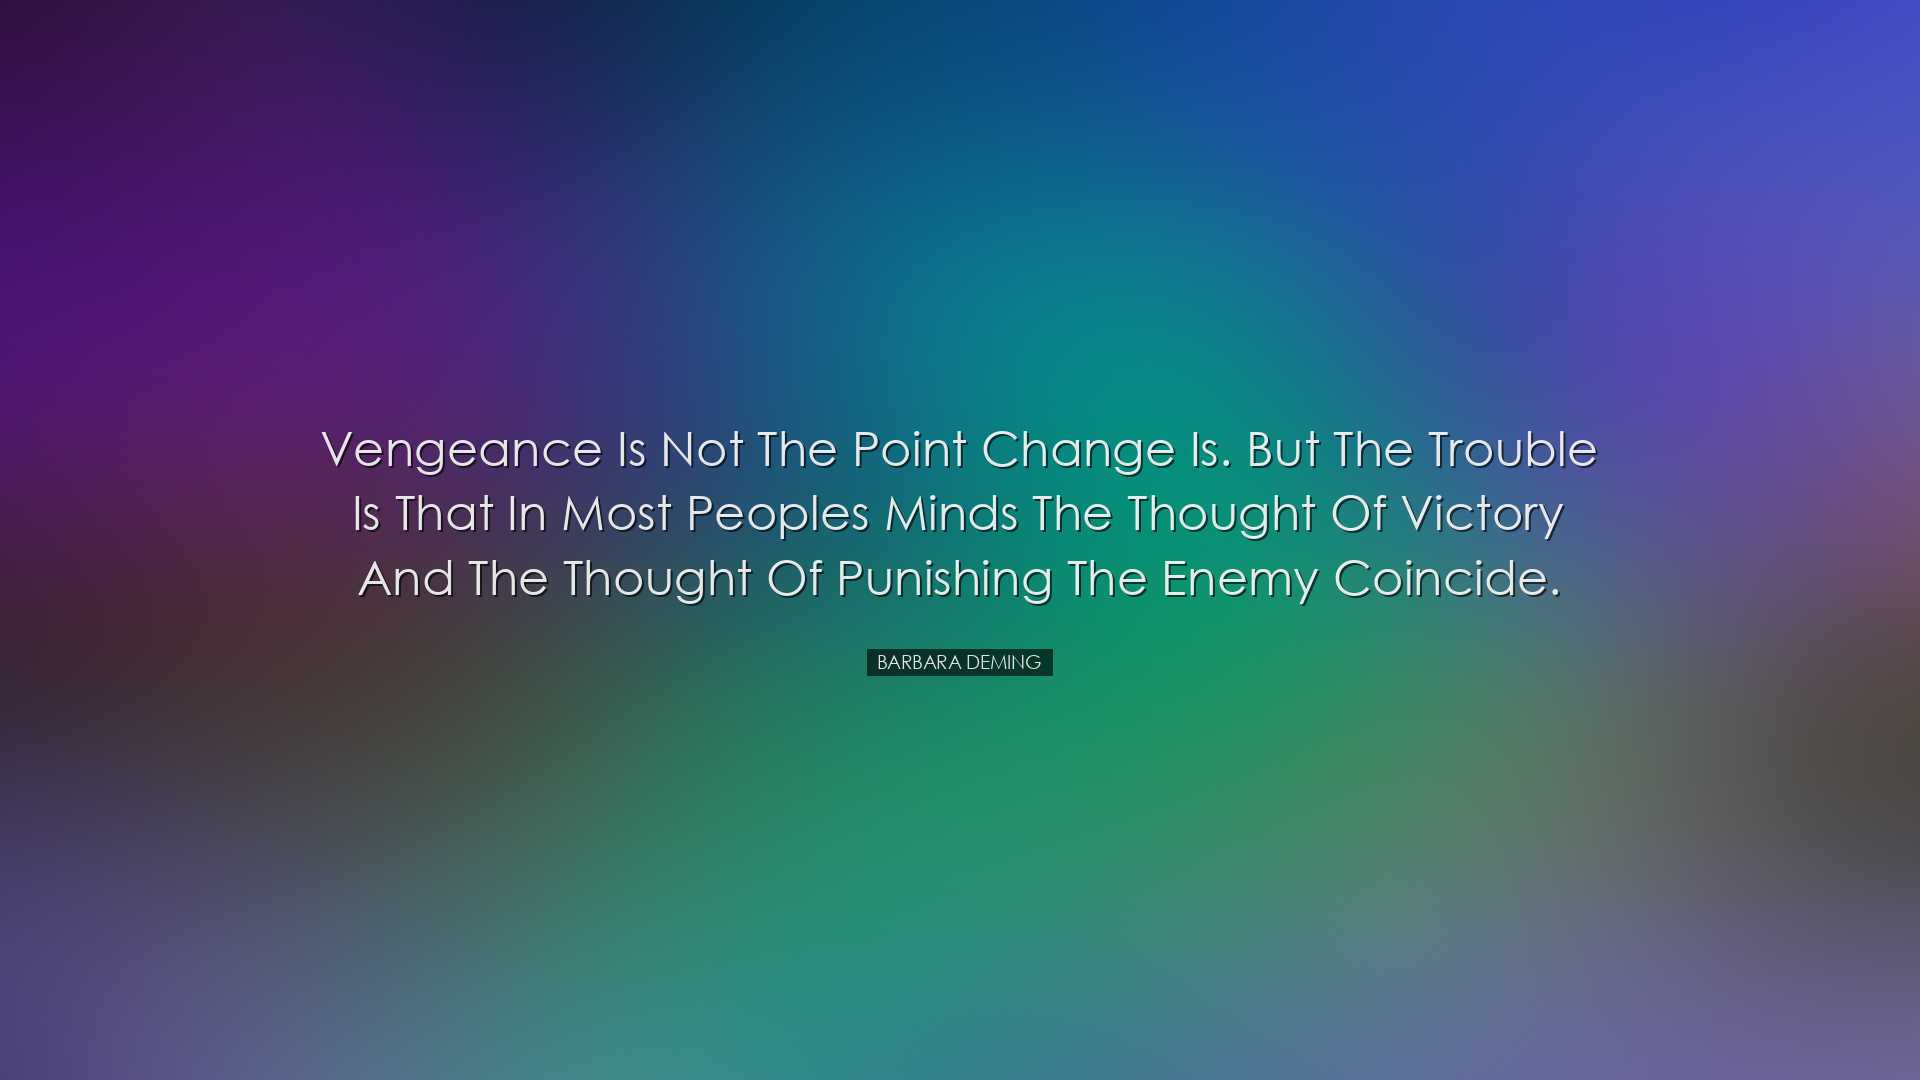 Vengeance is not the point change is. But the trouble is that in m